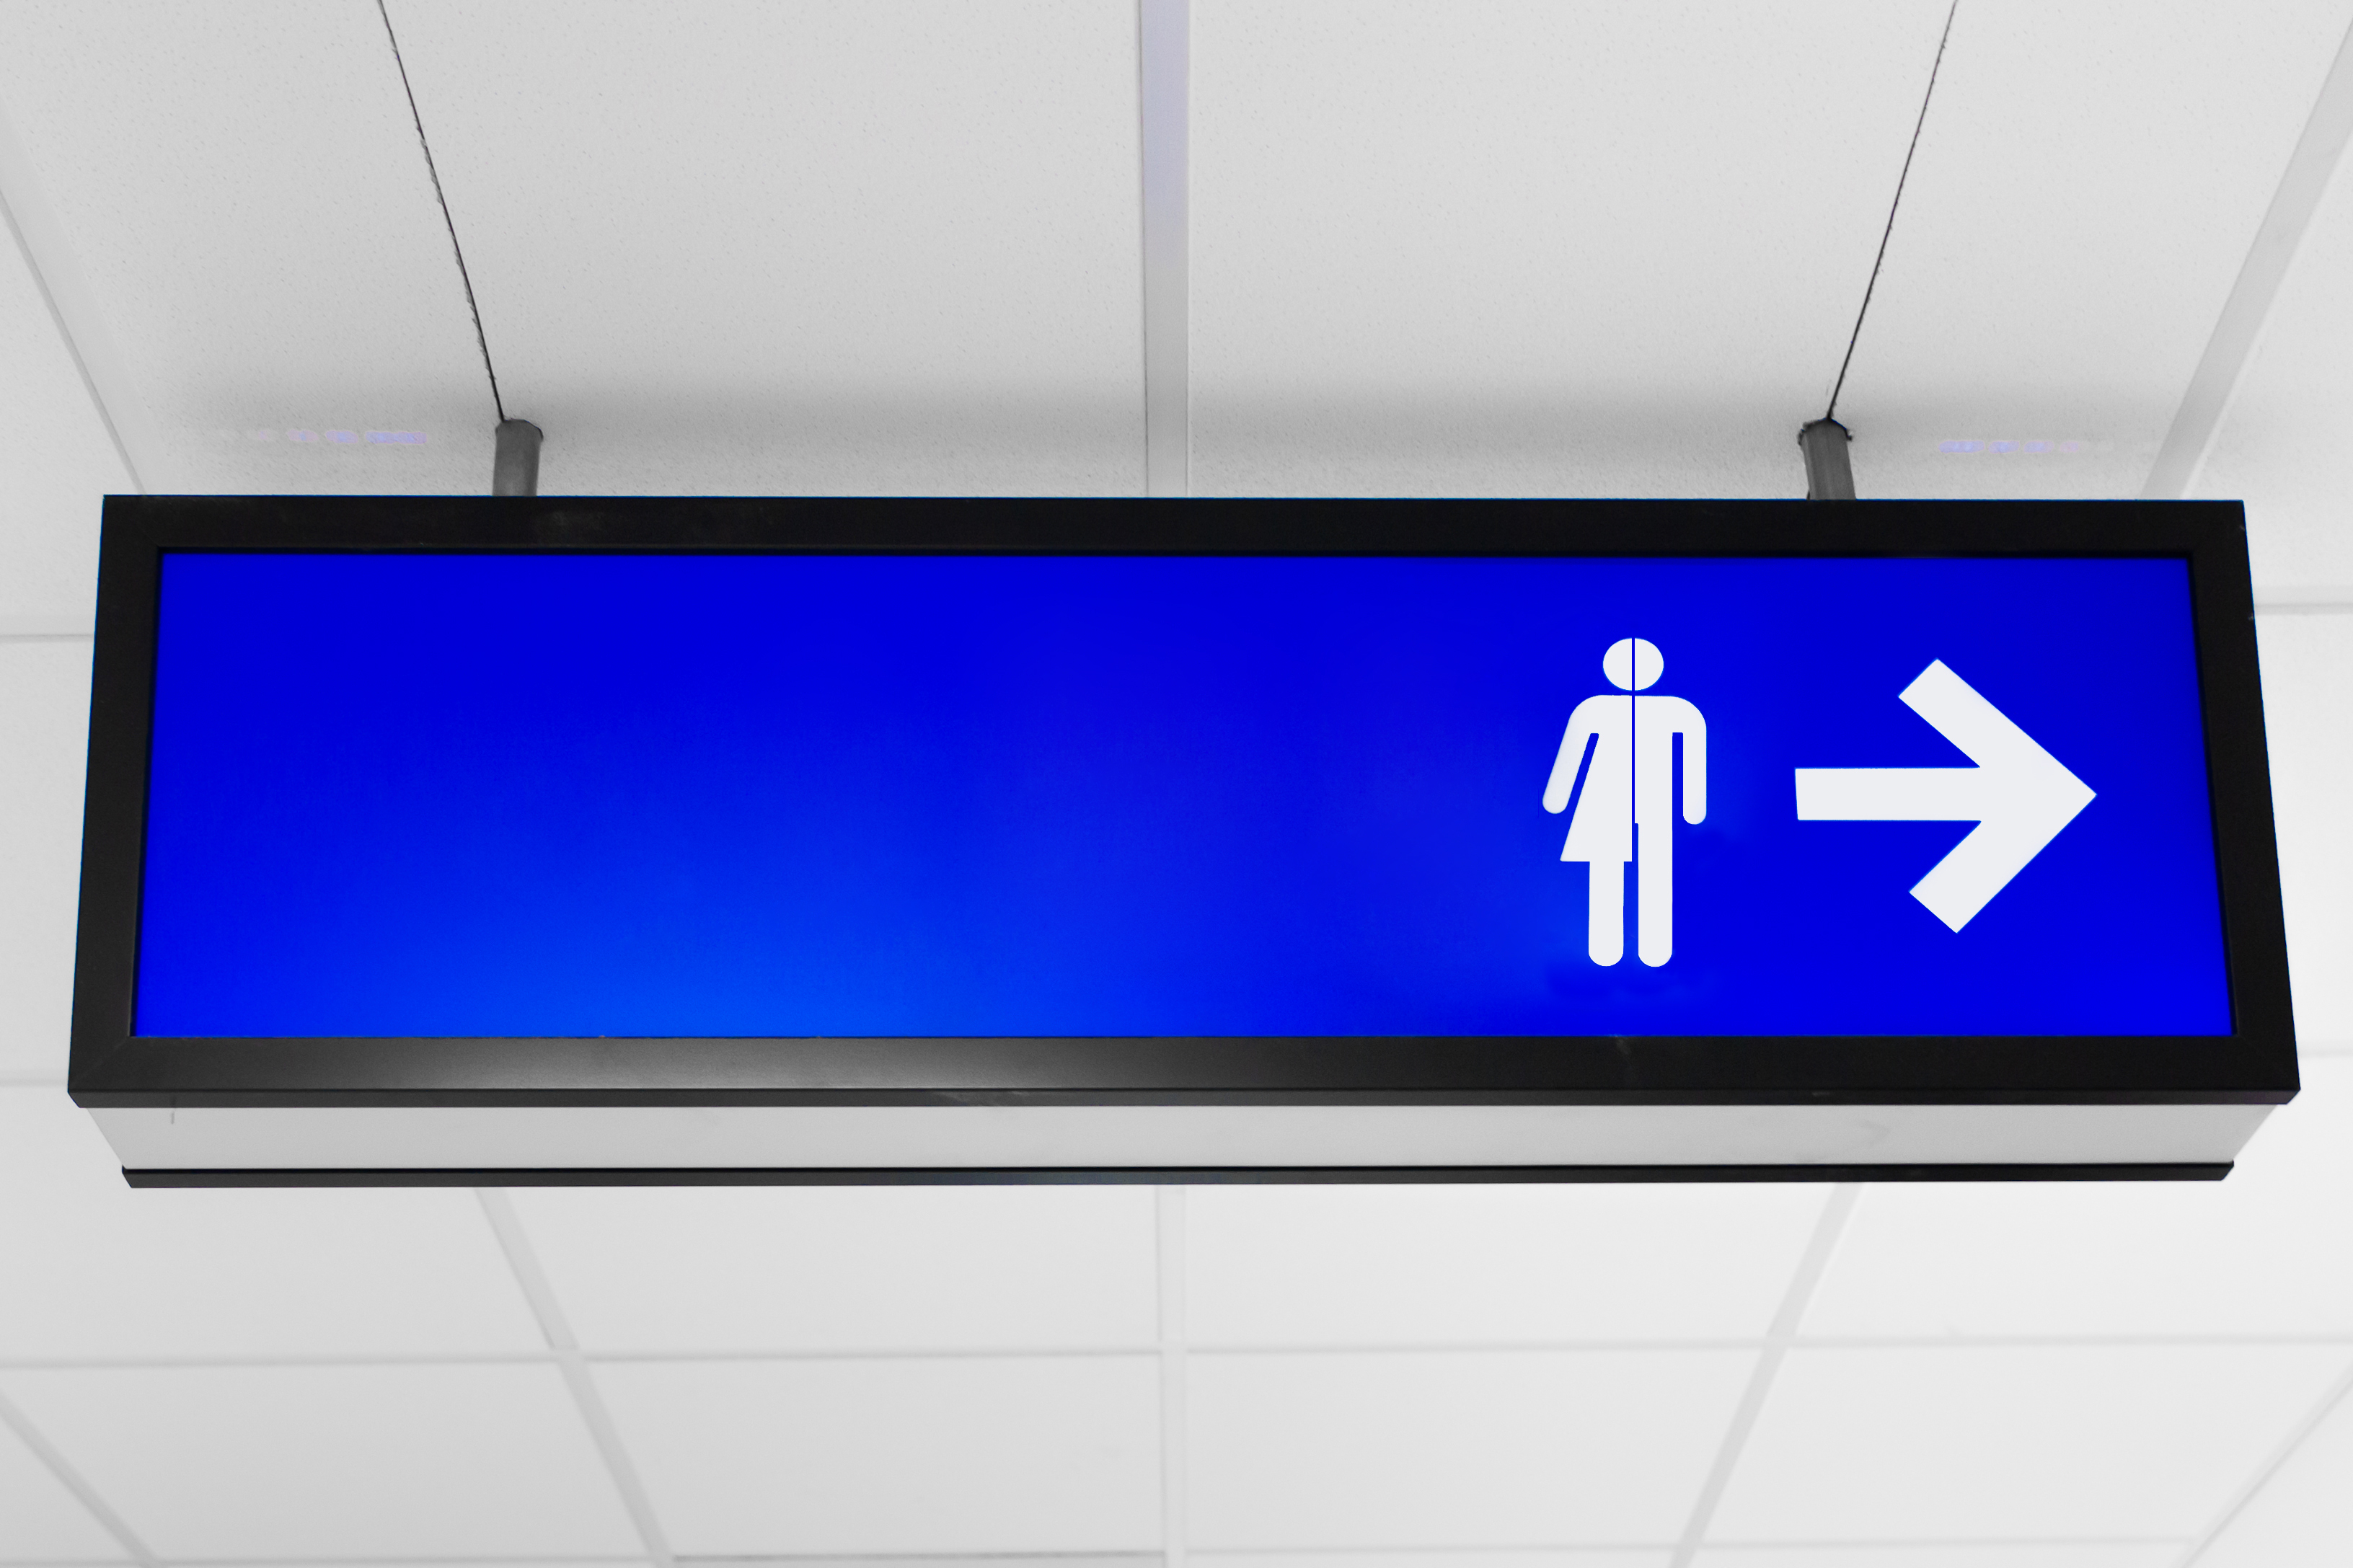 Gender Explained: How the Obama Administration Is Getting It Right on Gender Identity